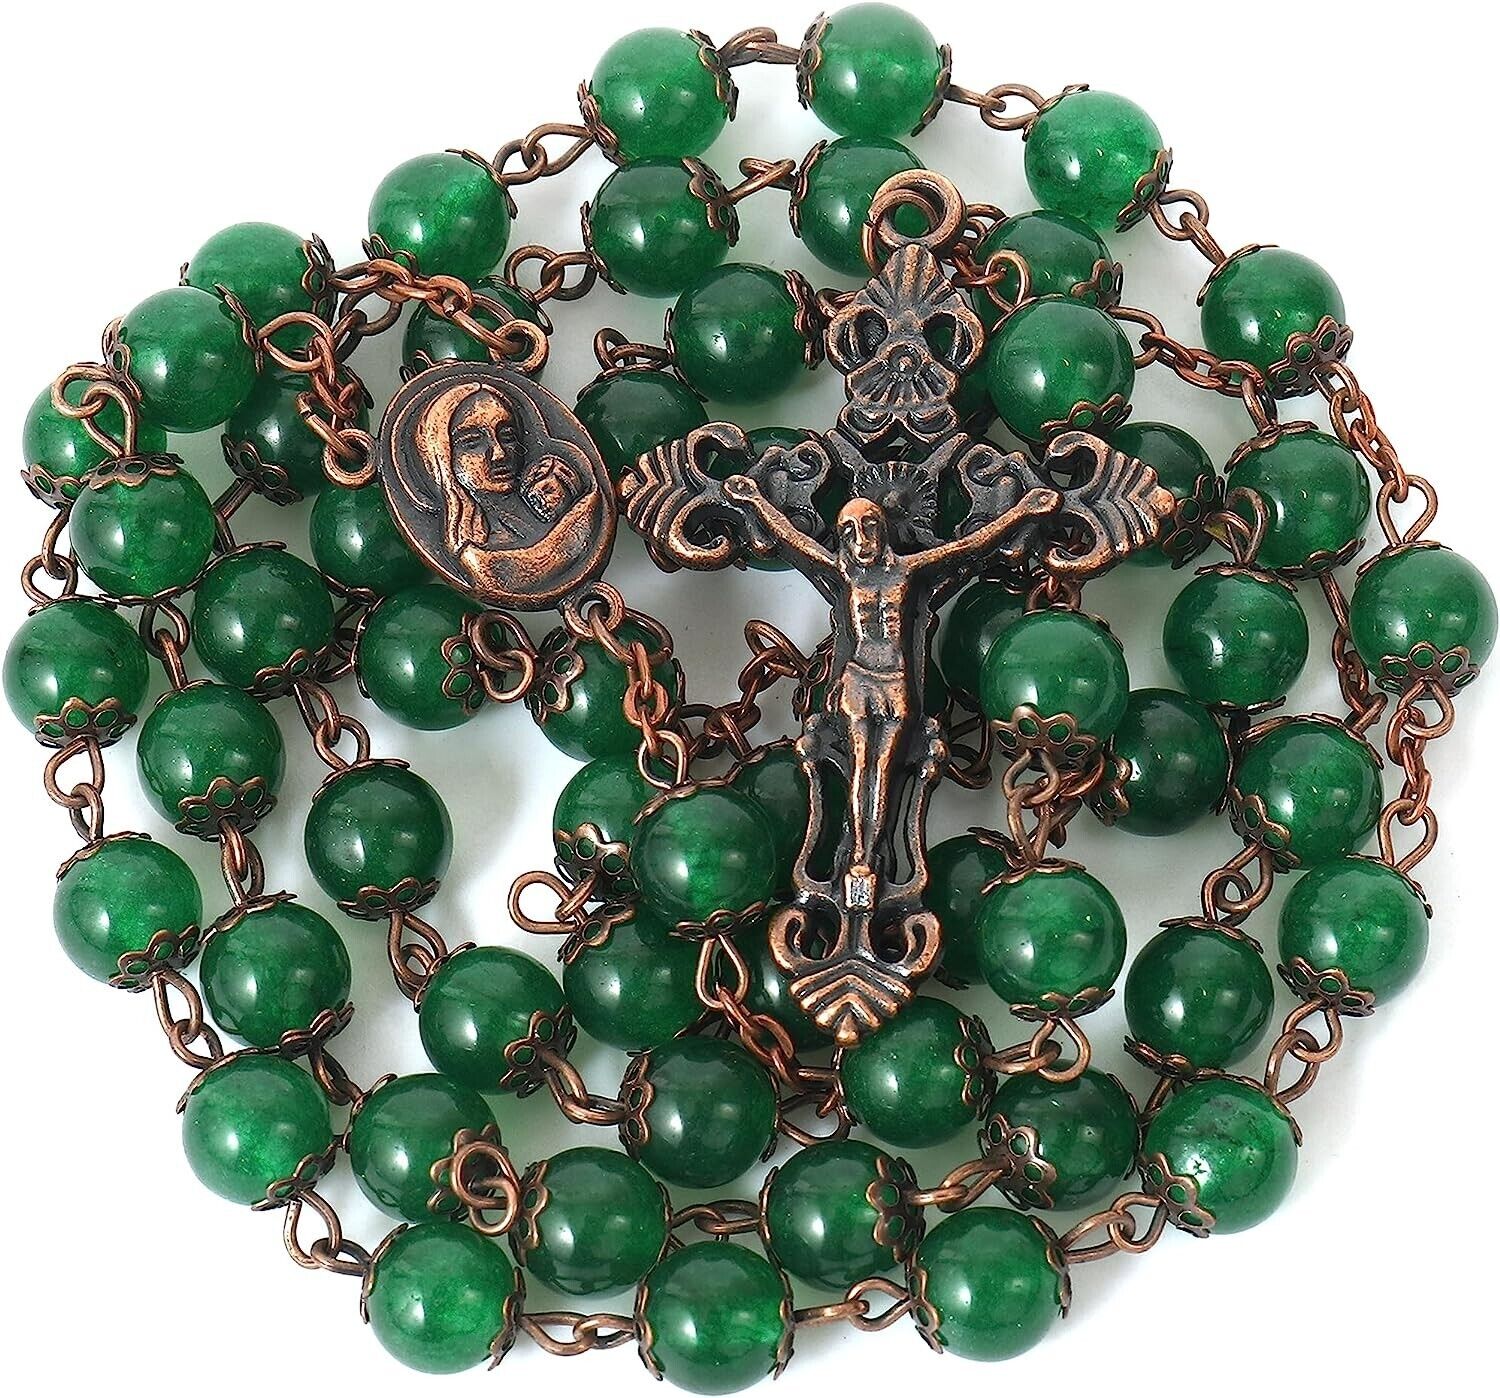 Green Jade Natural Stone Rosary Beads Necklace Holy Soil & Cross Crucifix